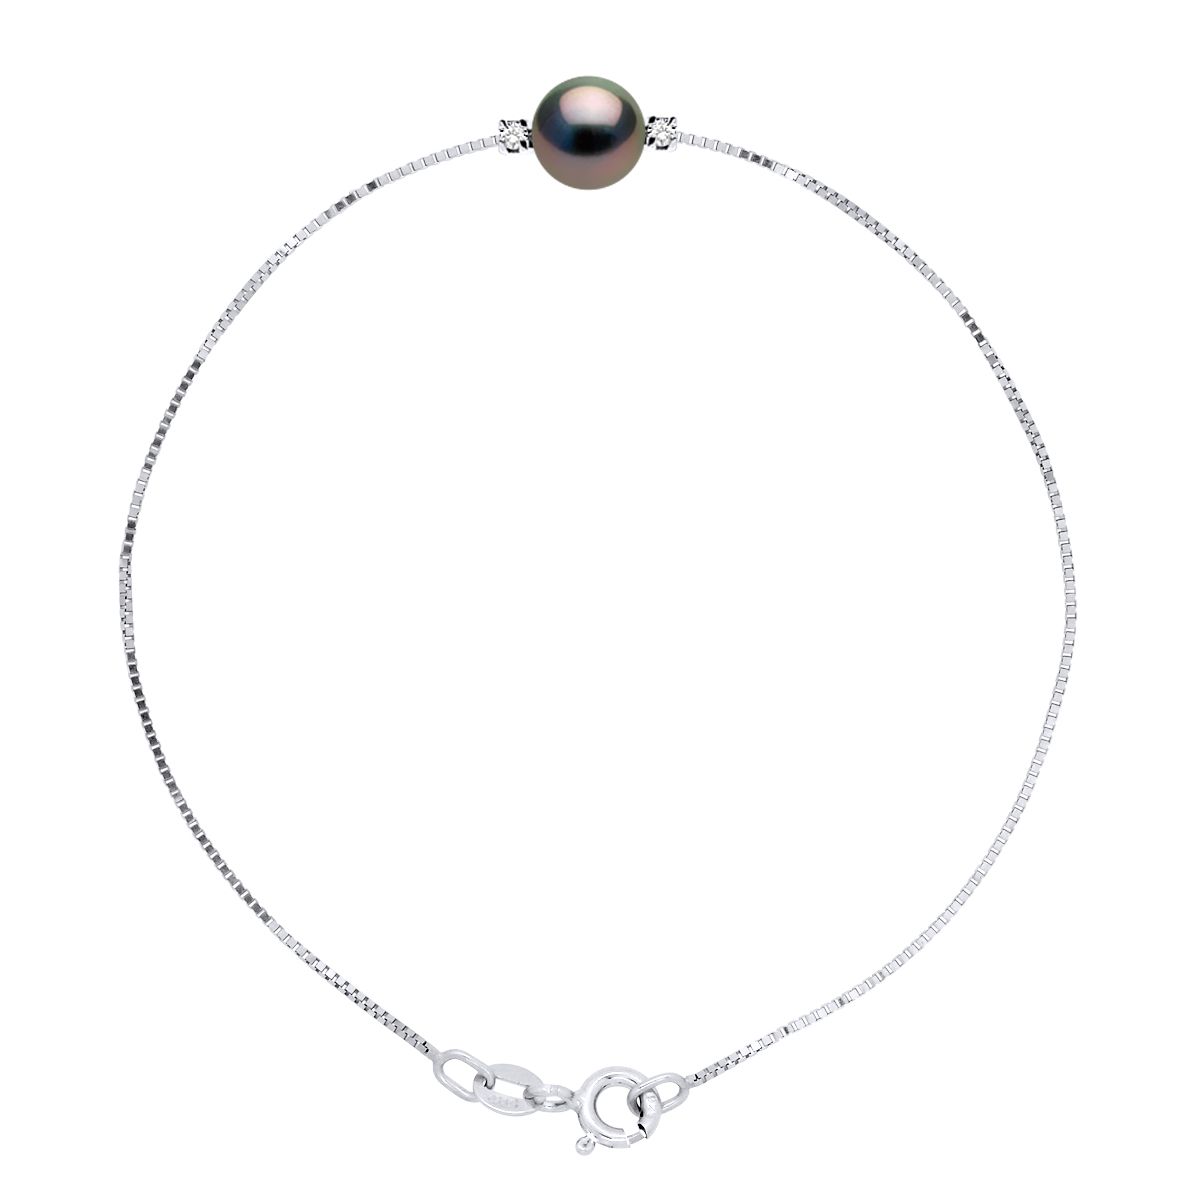 Bracelet Venetian Style chain Sterling Silver 925 Rhodium-plated set with True Cultured Tahitian Pearl Round 8-9 mm surrounded by 2 true Diamonds 0,03 Cts - Length 18 cm, 7 in - Our jewellery is made in France and will be delivered in a gift box accompanied by a Certificate of Authenticity and International Warranty